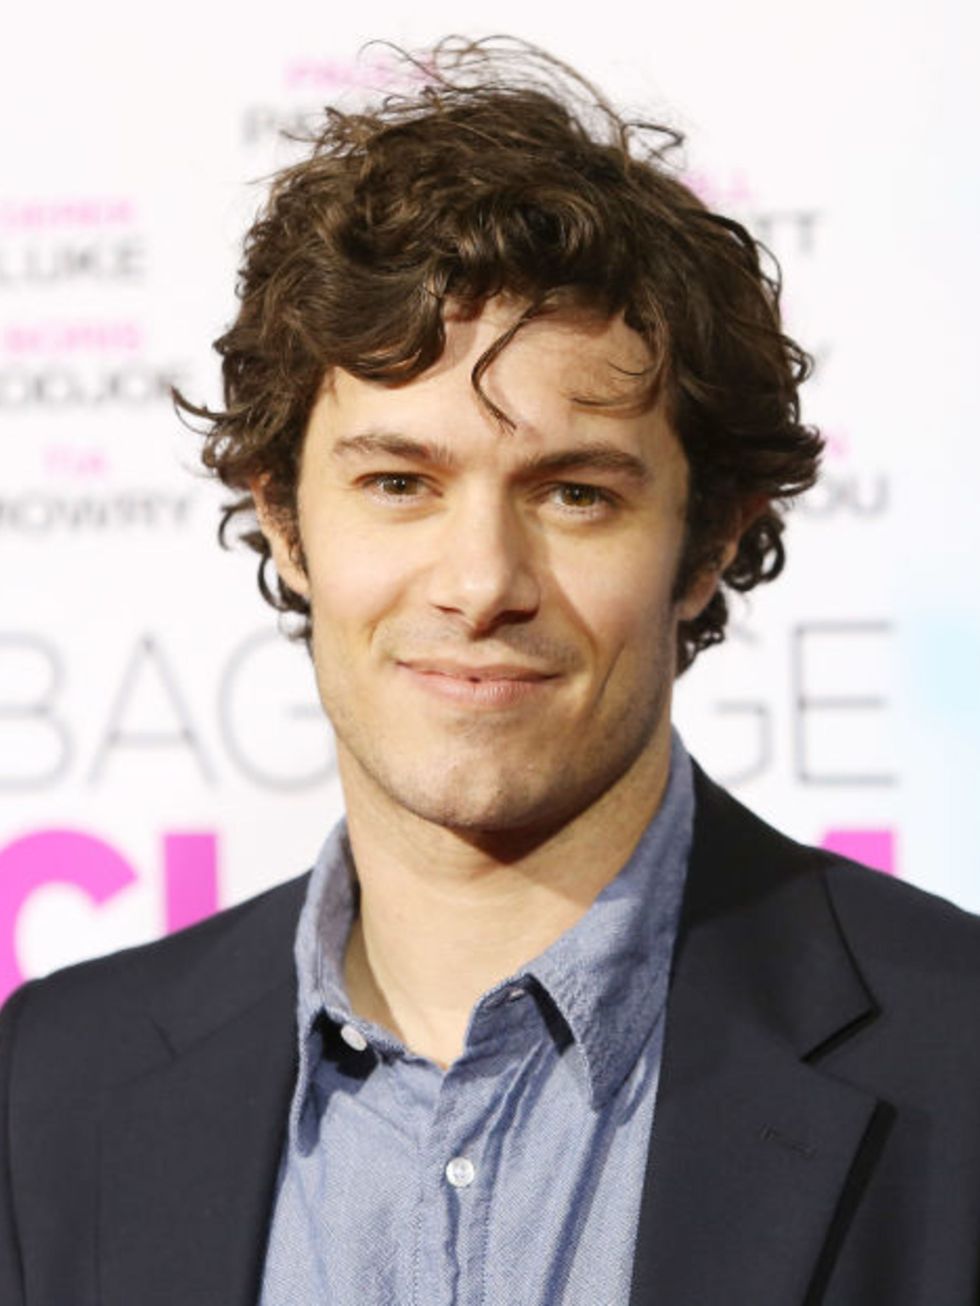 <p><strong>ADAM BRODY DOESN'T HATE SETH COHENBUT HE DOES HATE TALKING ABOUT HIM</strong></p>

<p>It's not that Adam Brody hates the character he played on <em>The O.C</em>., it's that he hates talking about him now. In an interview with the <a href="http